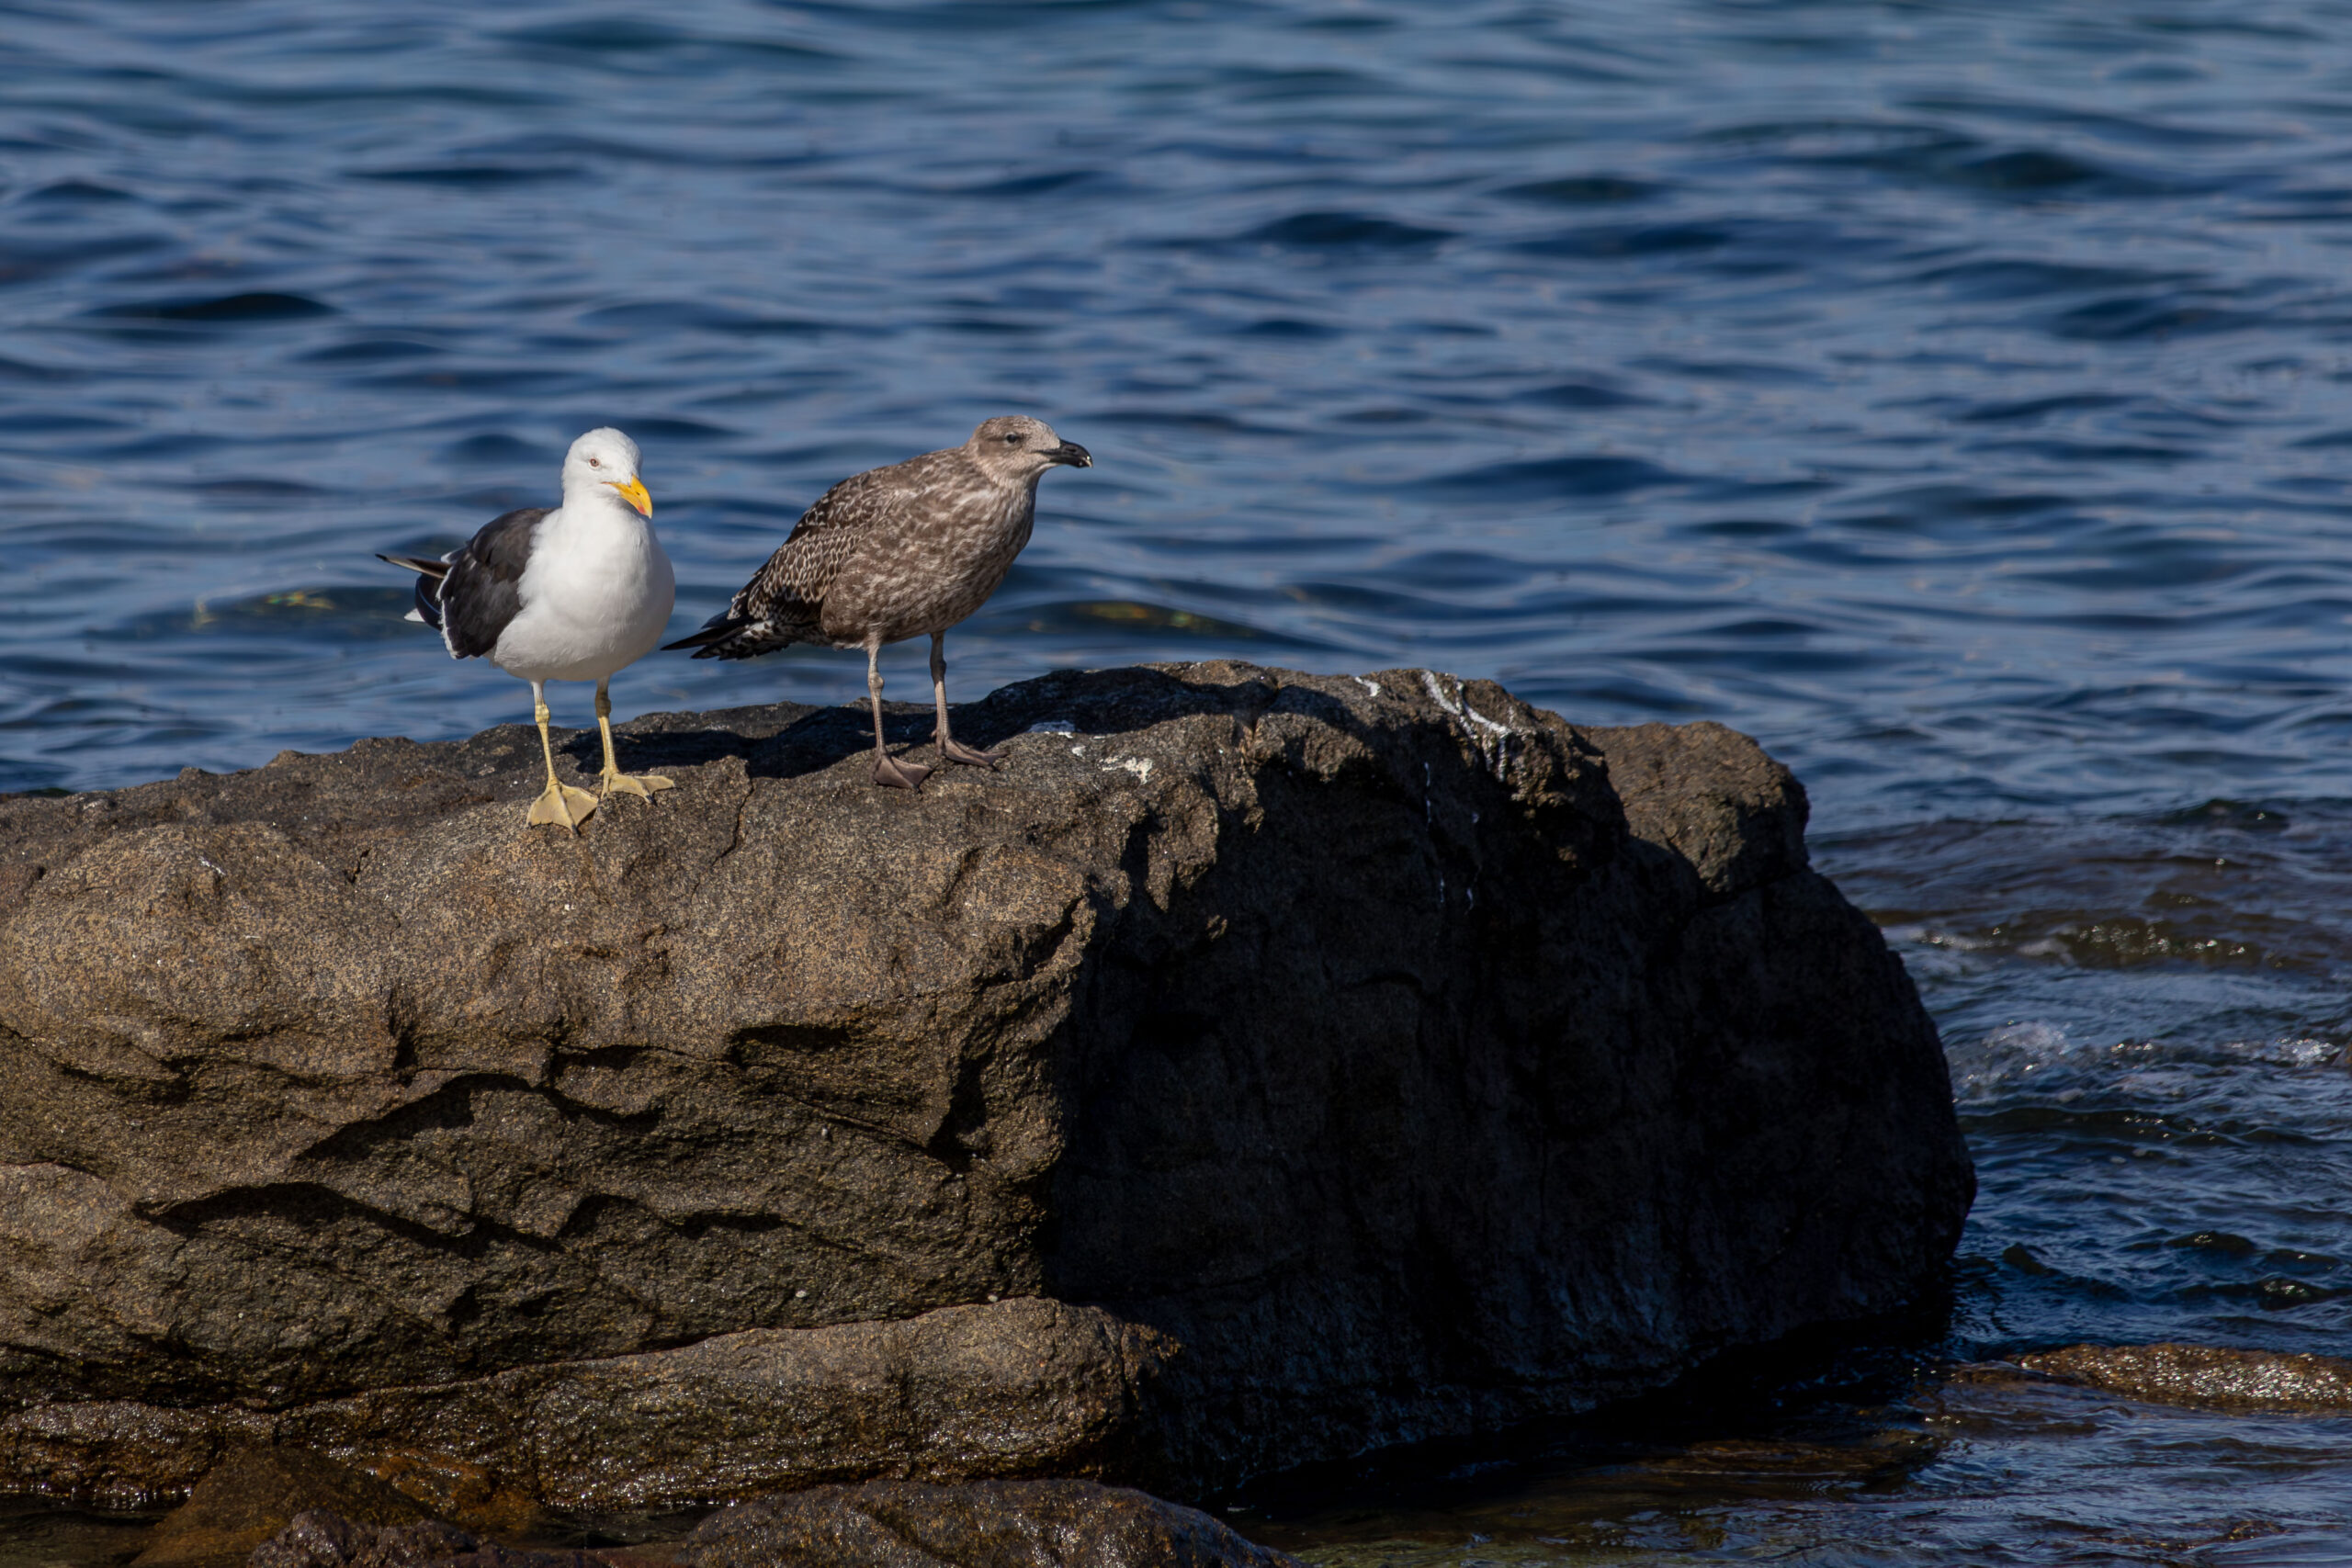 An adult and juvenile kelp gull standing on a rock in the water. The juvenile is brown; the adult has a white front and black back